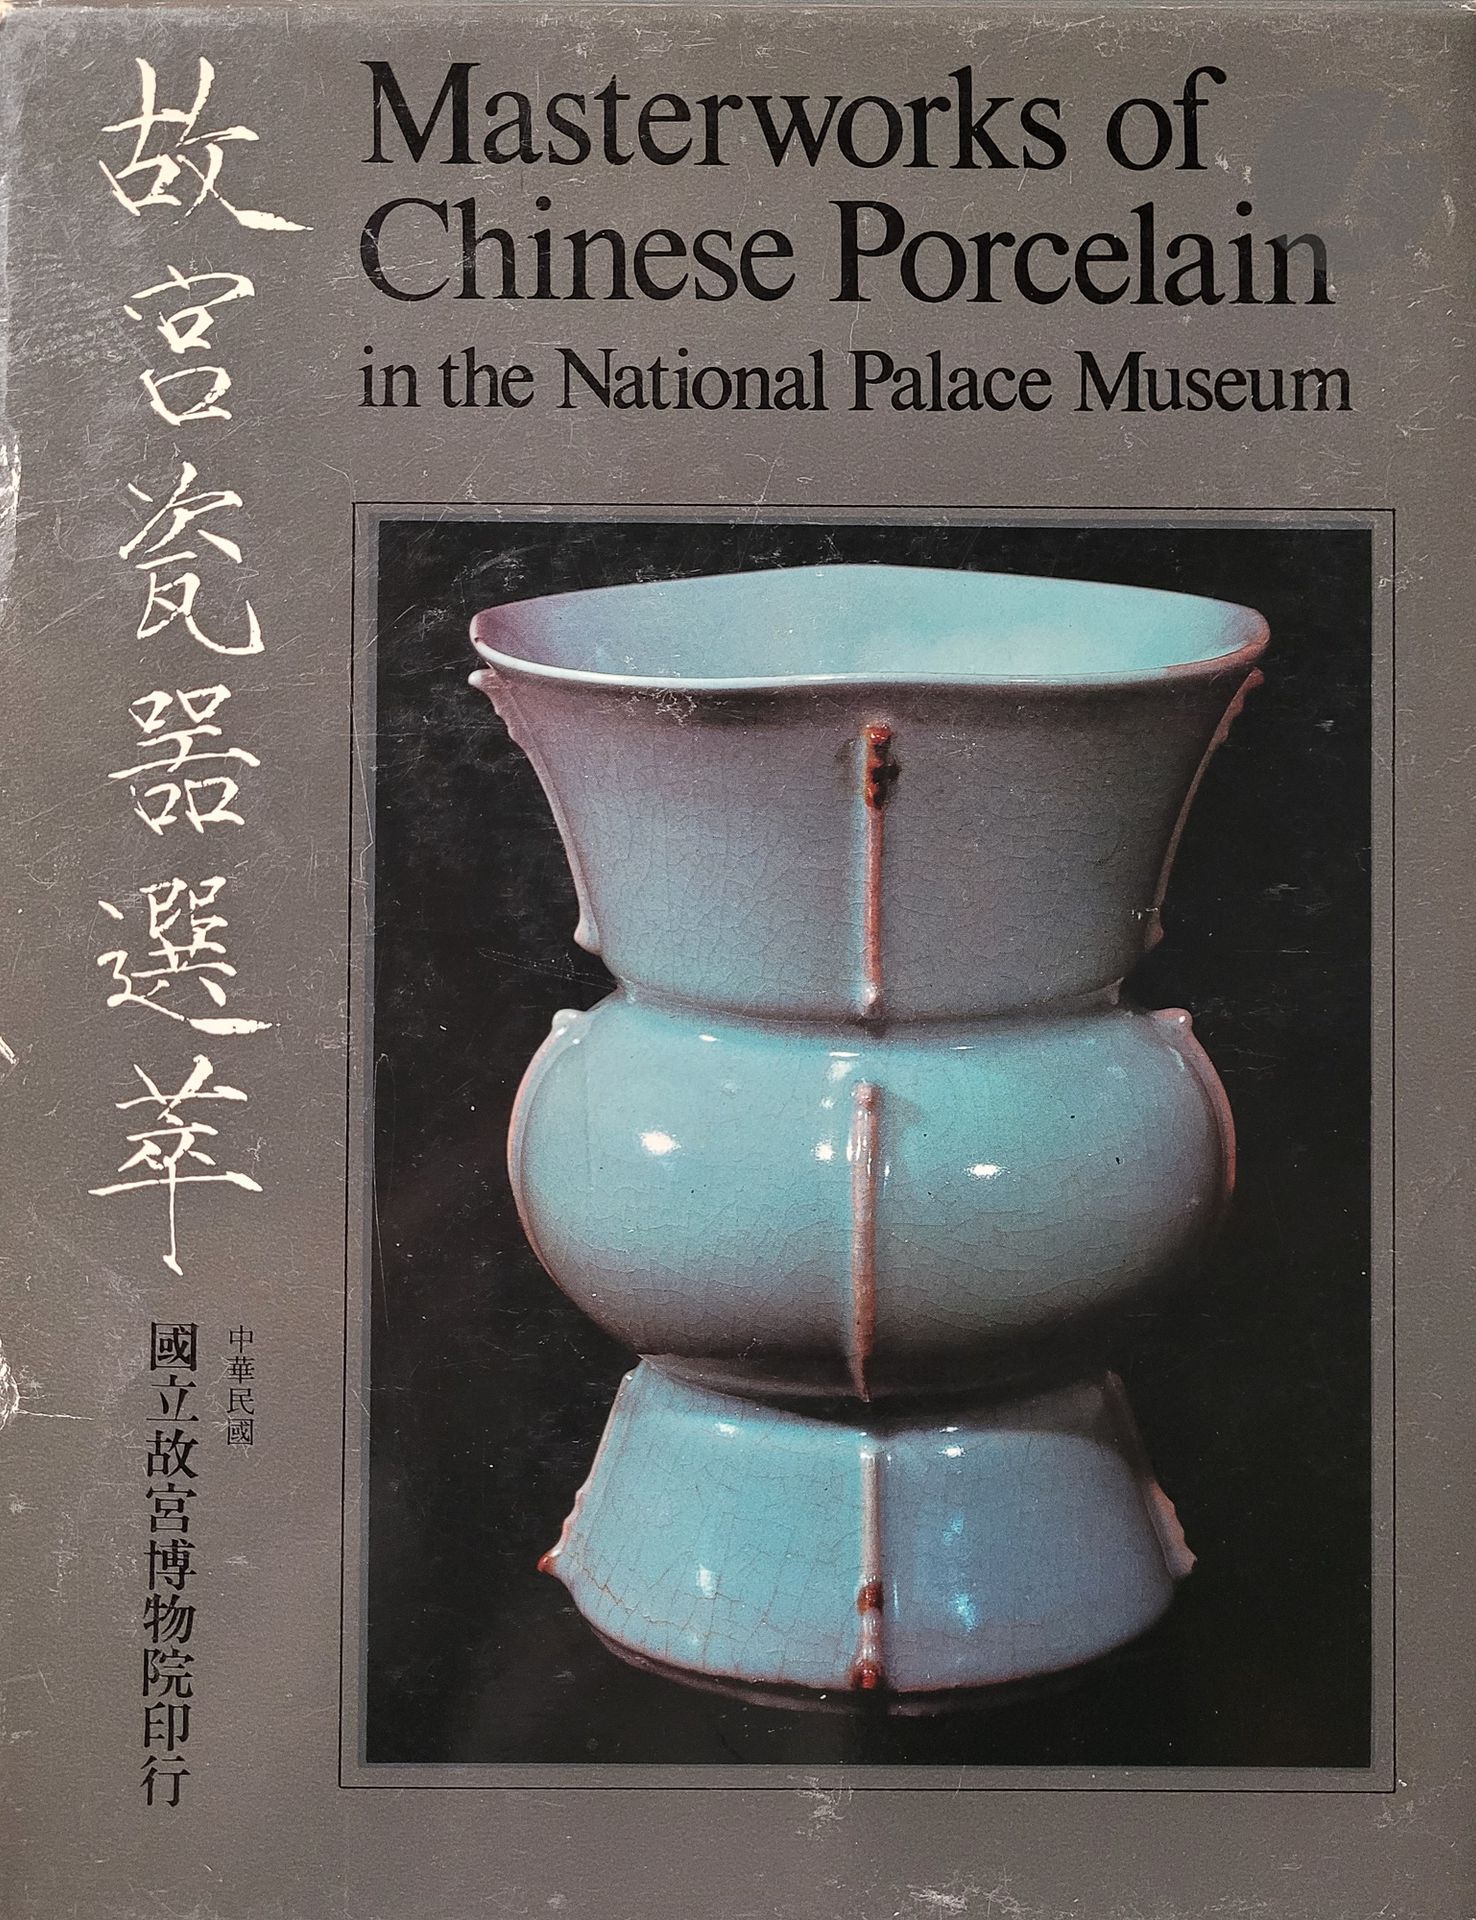 Null CHINA - PORCELAIN] 
Five books :
- Seventeenth century Chinese porcelain fr&hellip;